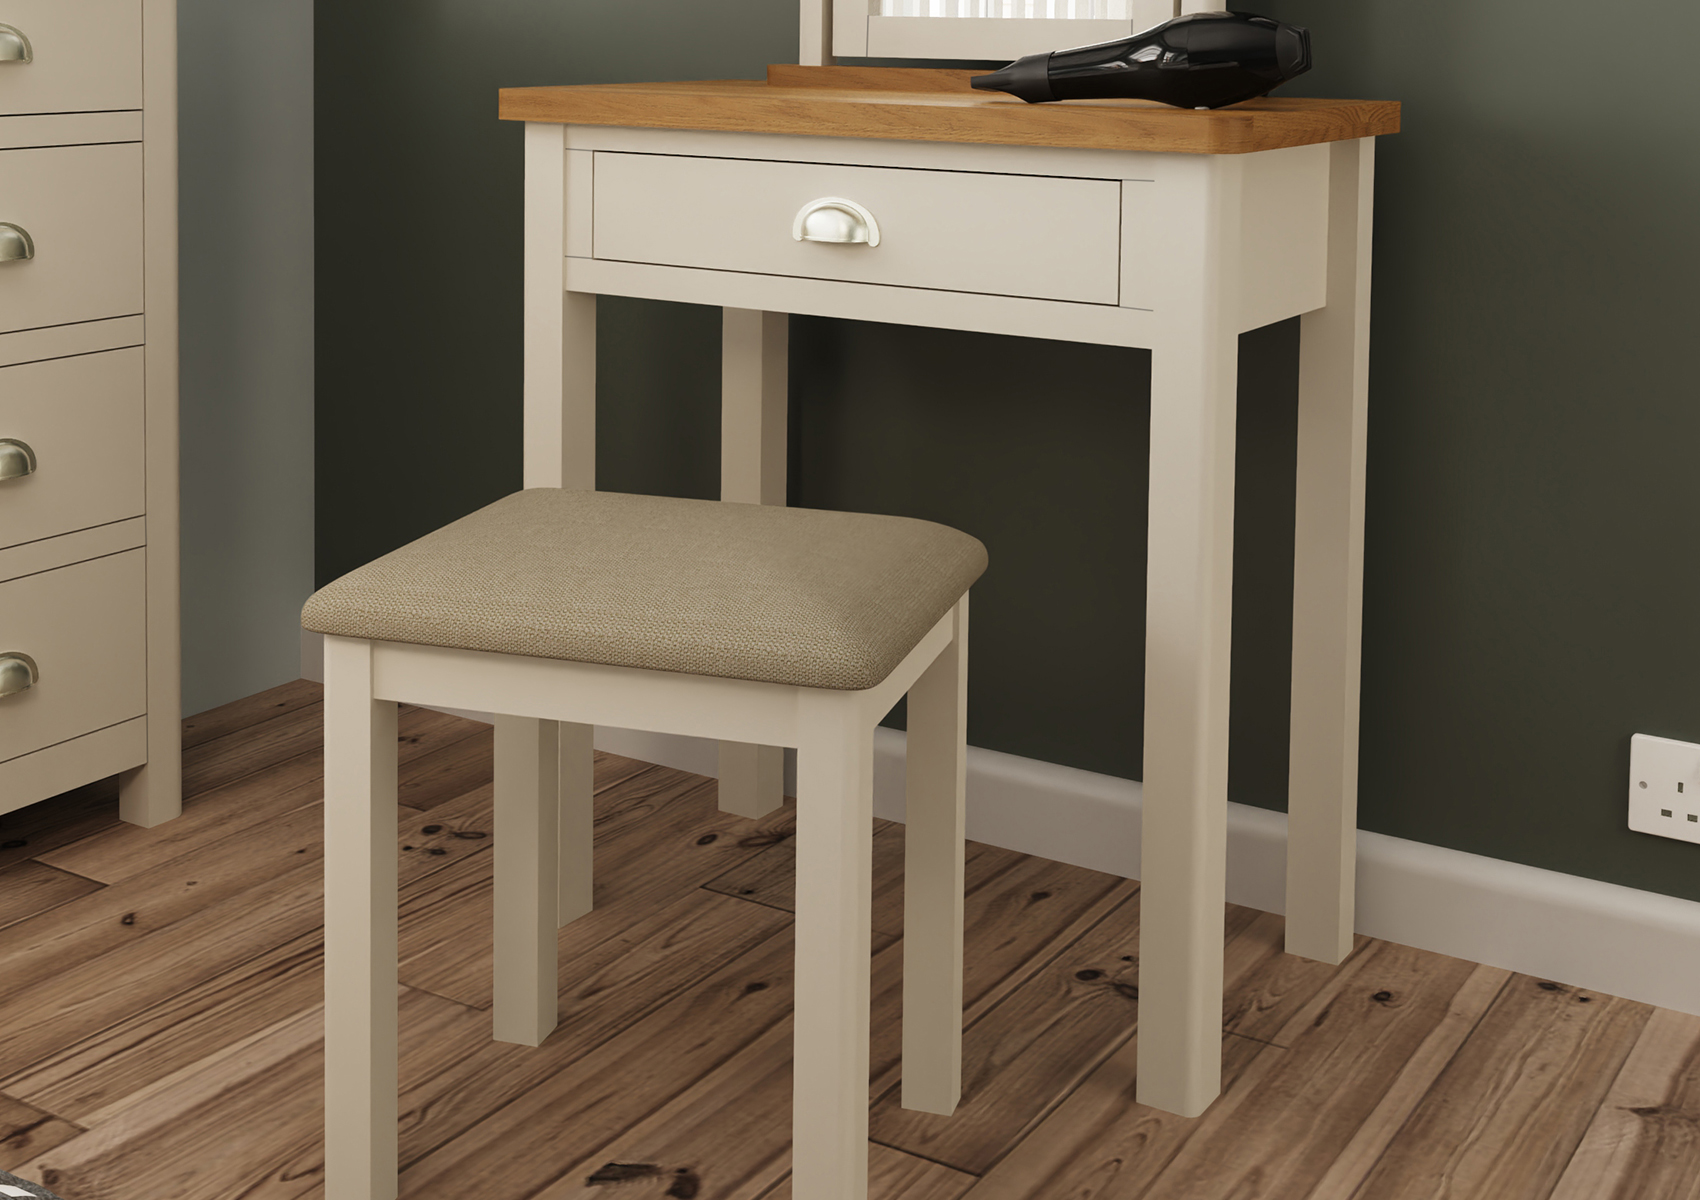 View Radstock Truffle 2 Drawer Dressing Table Time4Sleep information